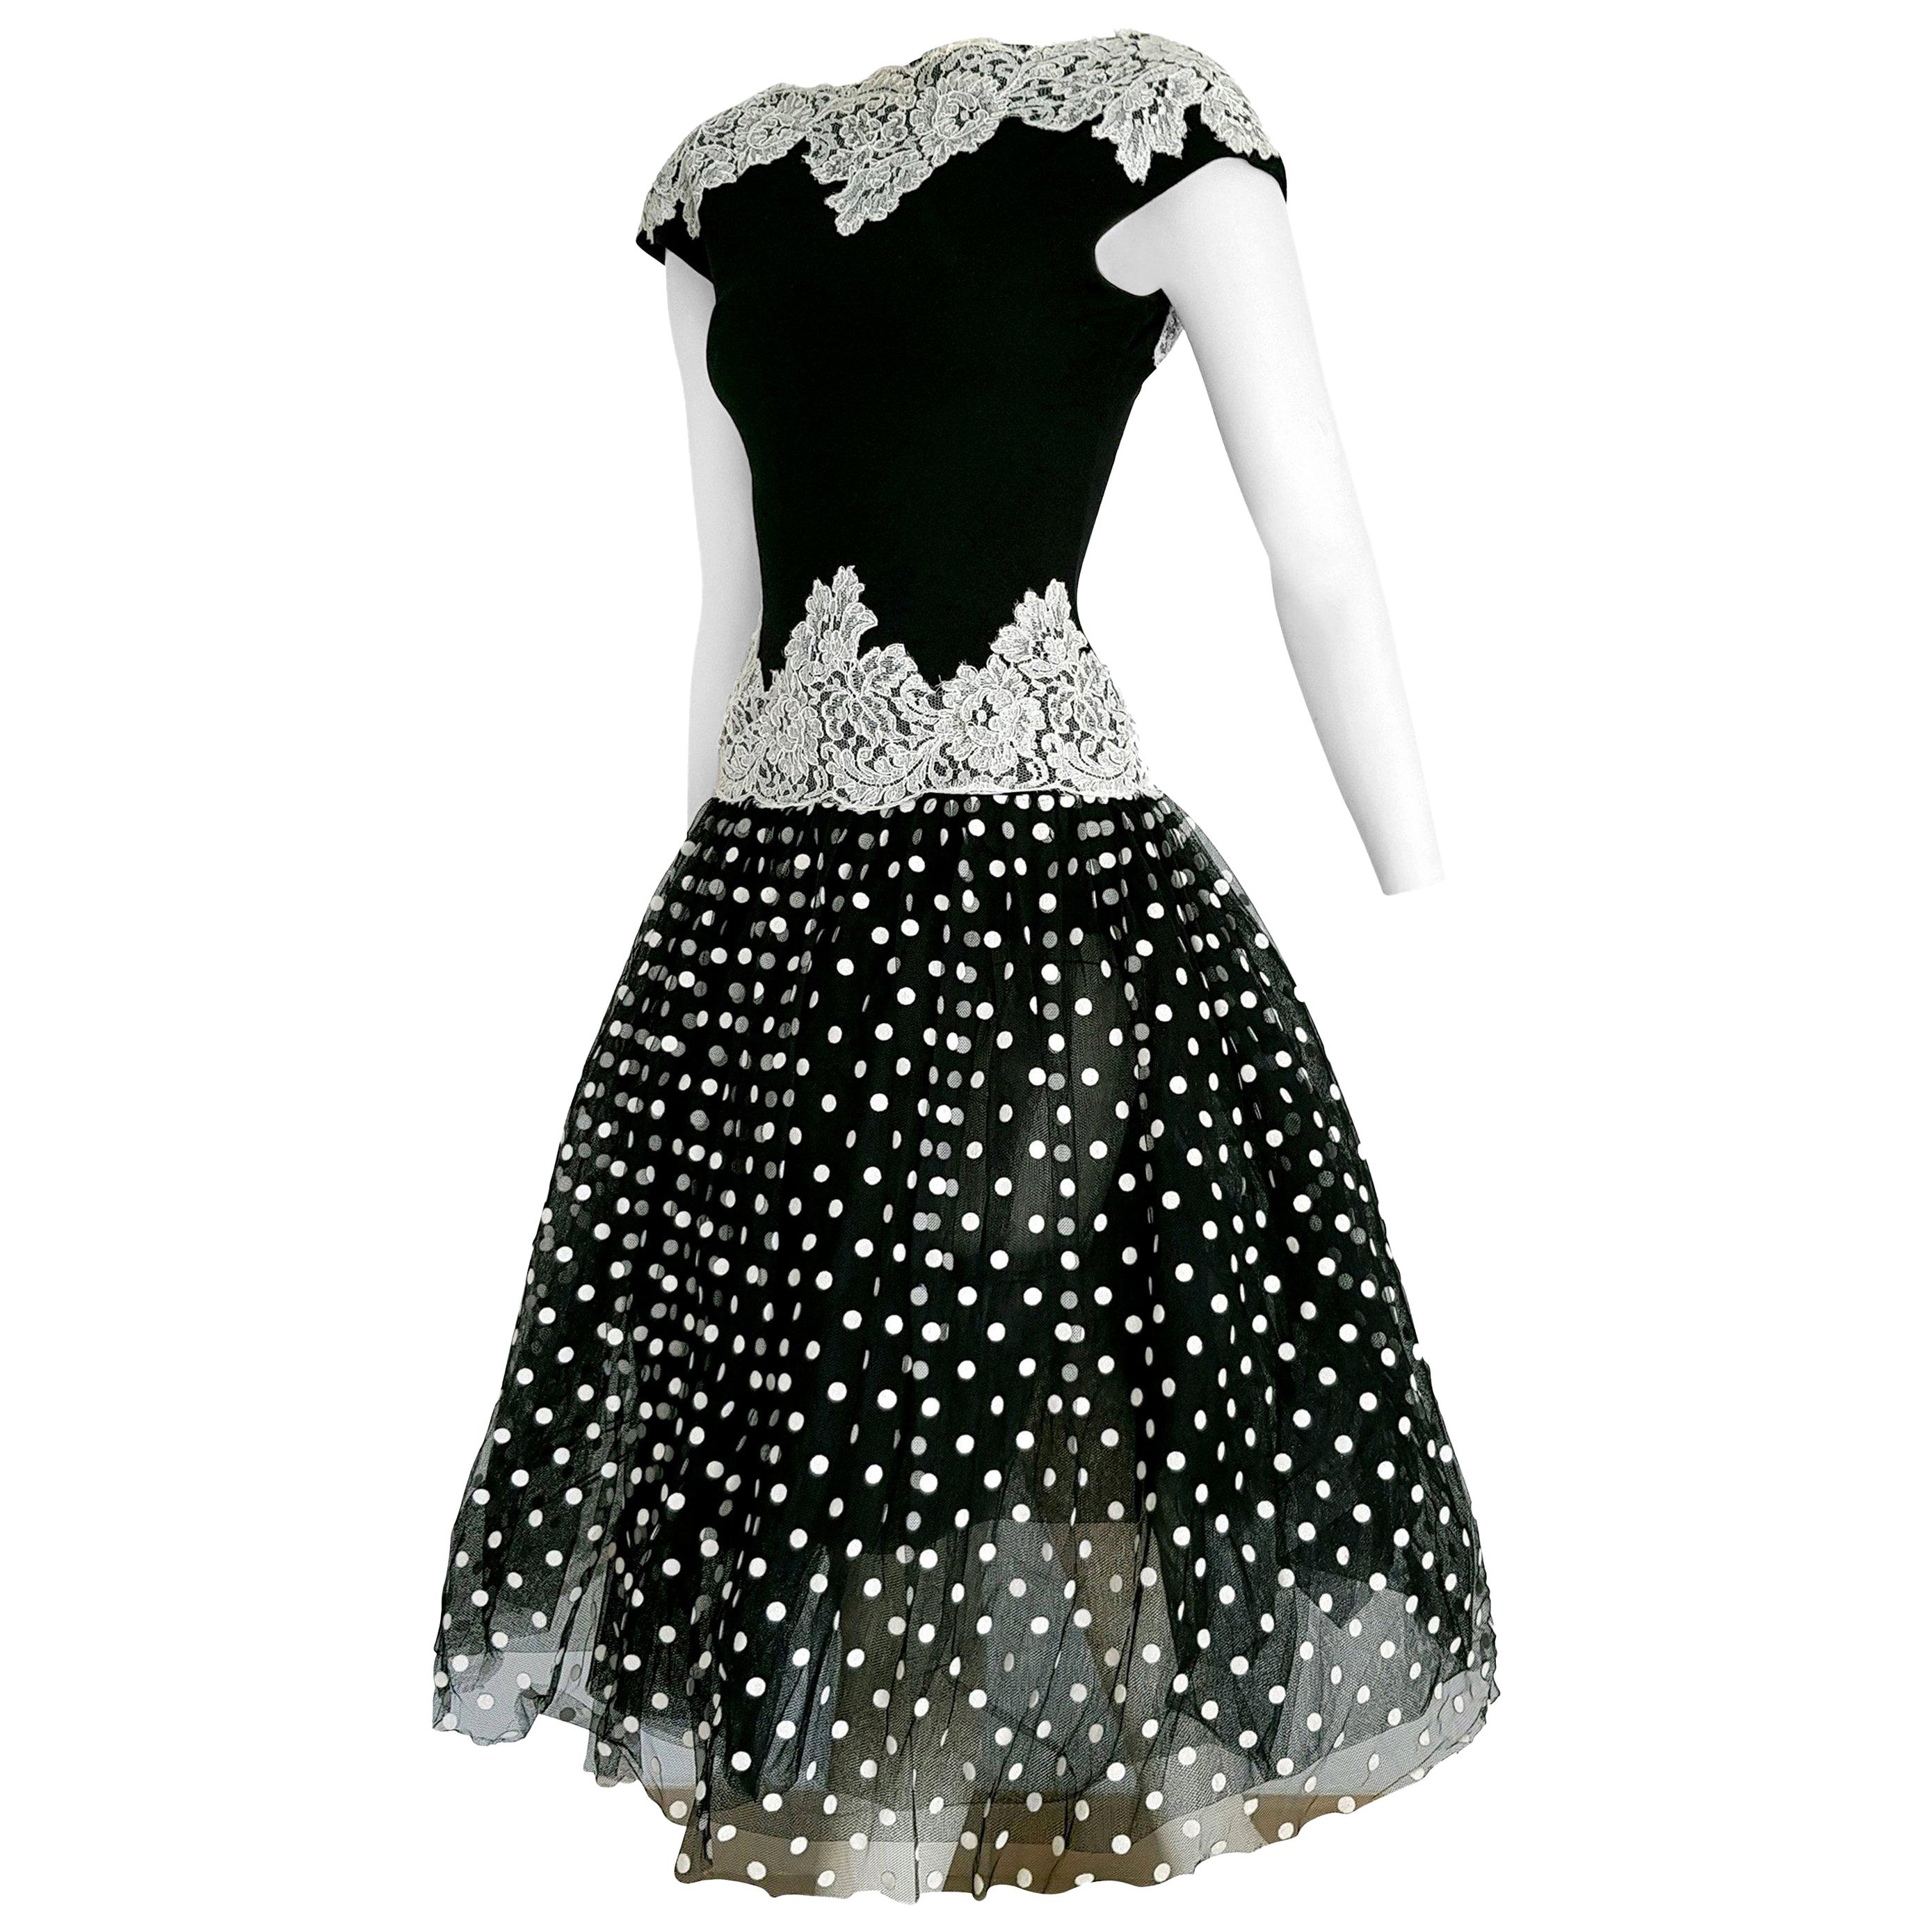 Isabelle ALLARD Paris black plumetis fabric, white polka dots, shoulders back and waist lace, black silk cotton wool dress - Unworn, New.

Isabelle ALLARD is a fashion designer that created only haute couture and selling to international customers